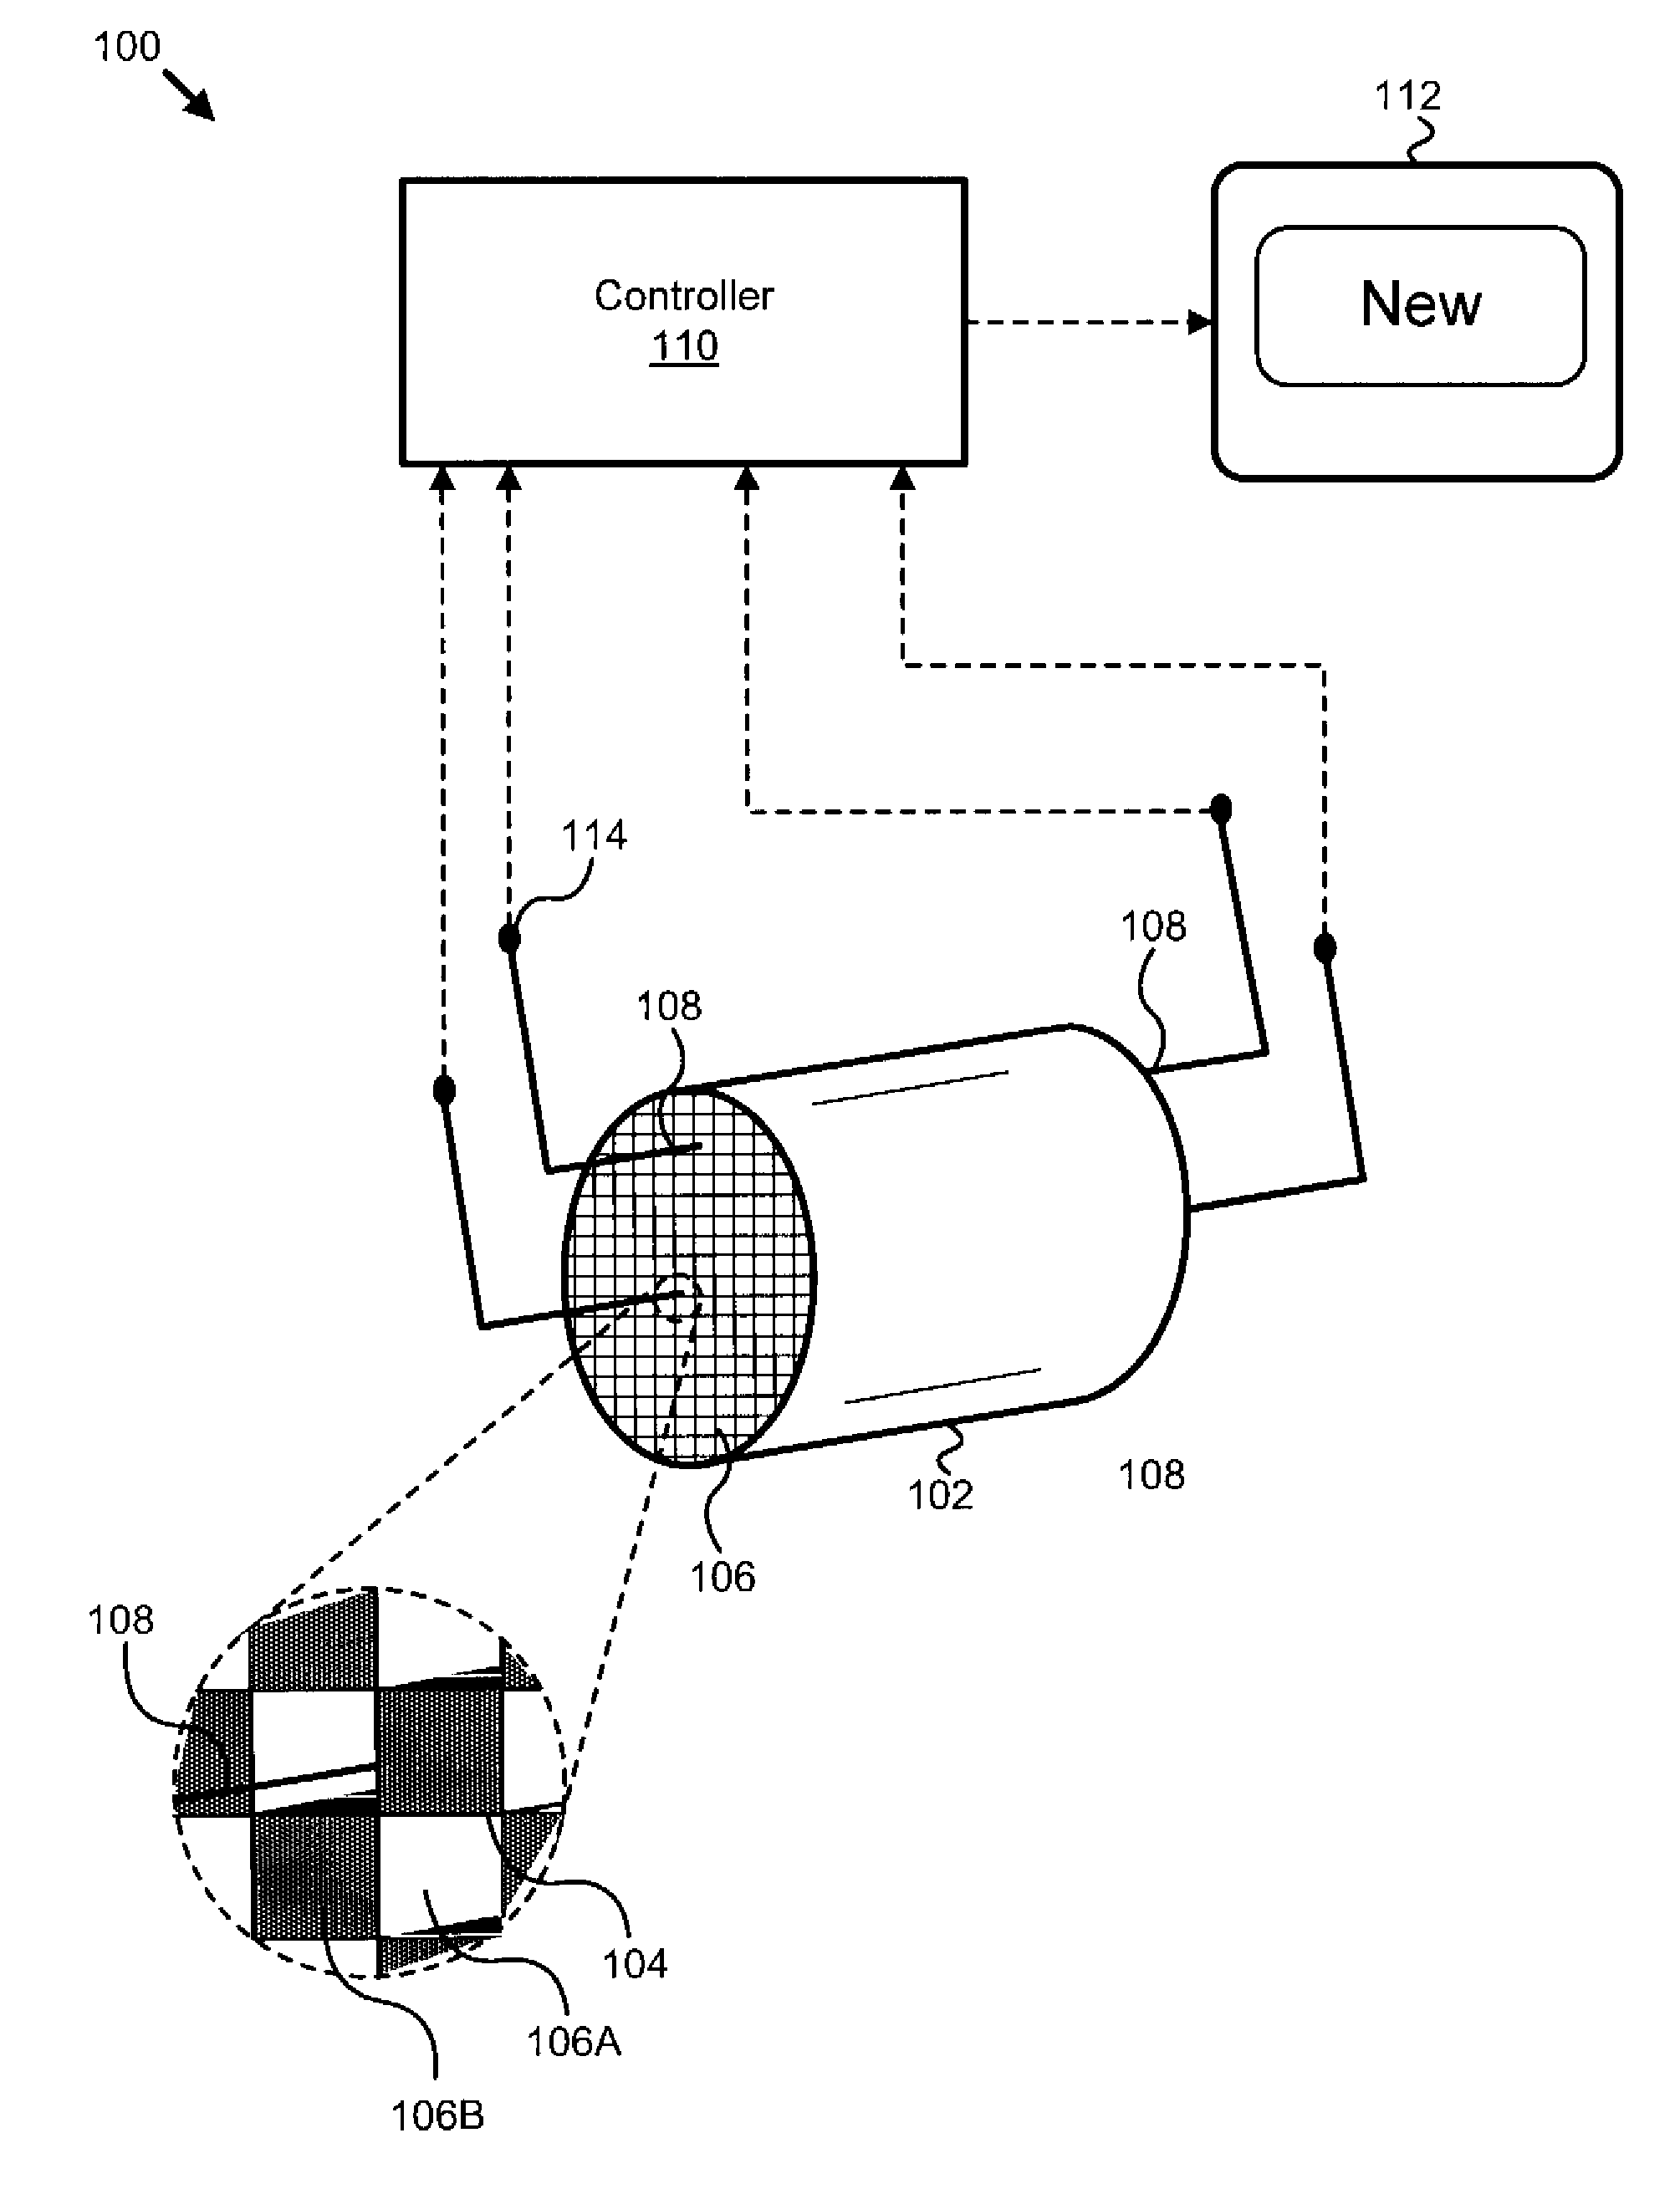 Apparatus, system, and method for determining a time-temperature history of an aftertreatment device